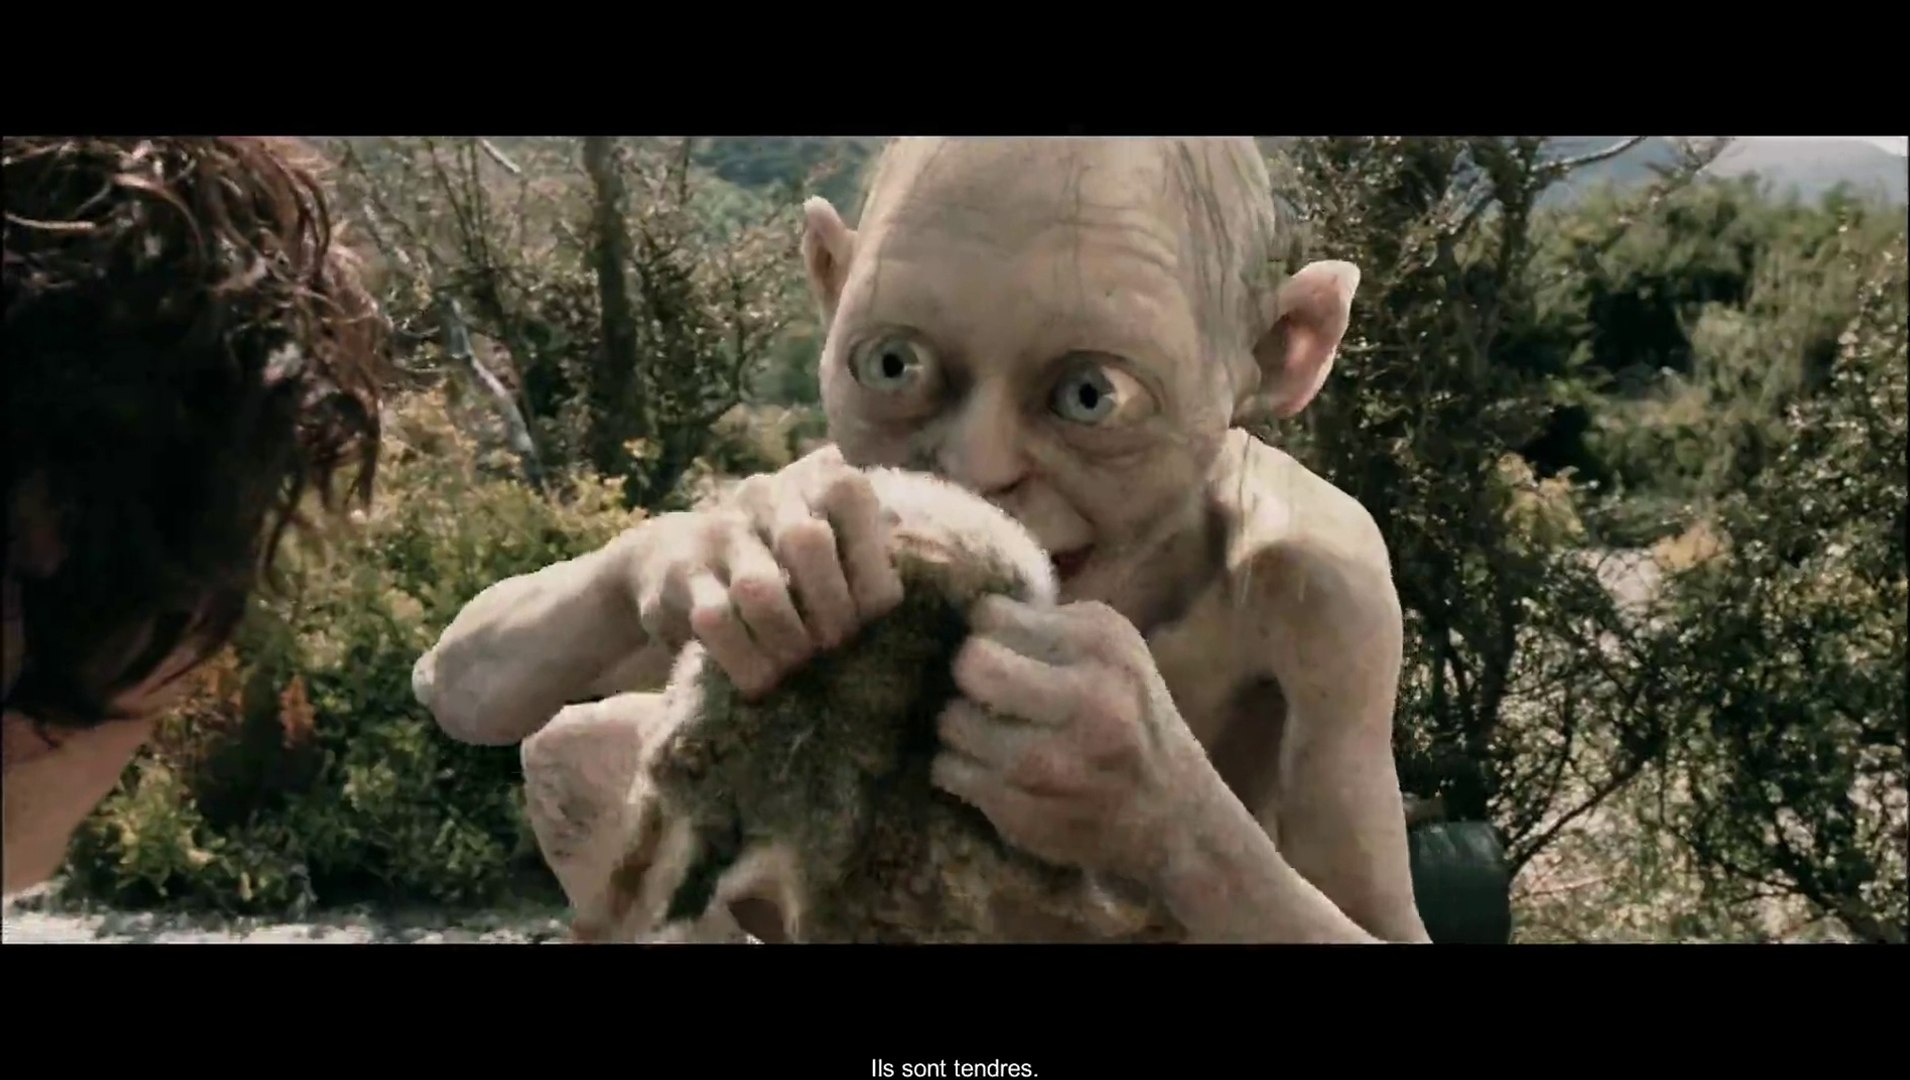 The Lord of the Rings: Gollum review - boil it, mash it, stick it